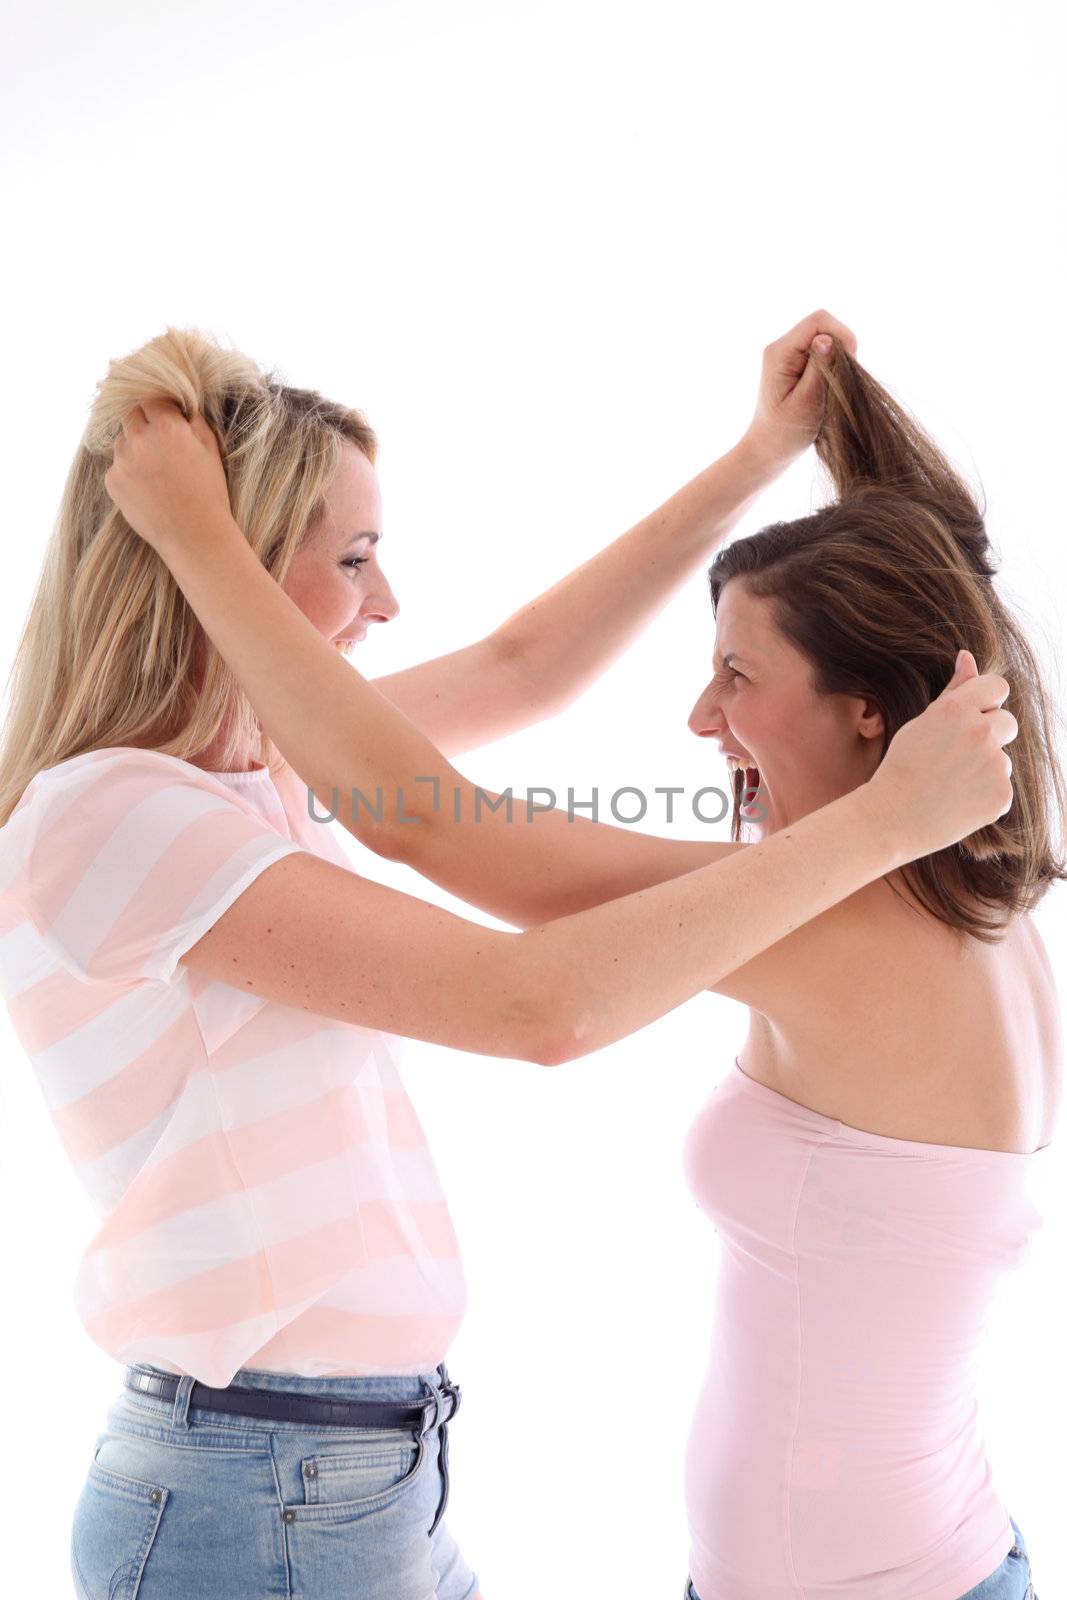 Young women laughing and frolicking together pulling each other's hair while enjoying a bit of fun 